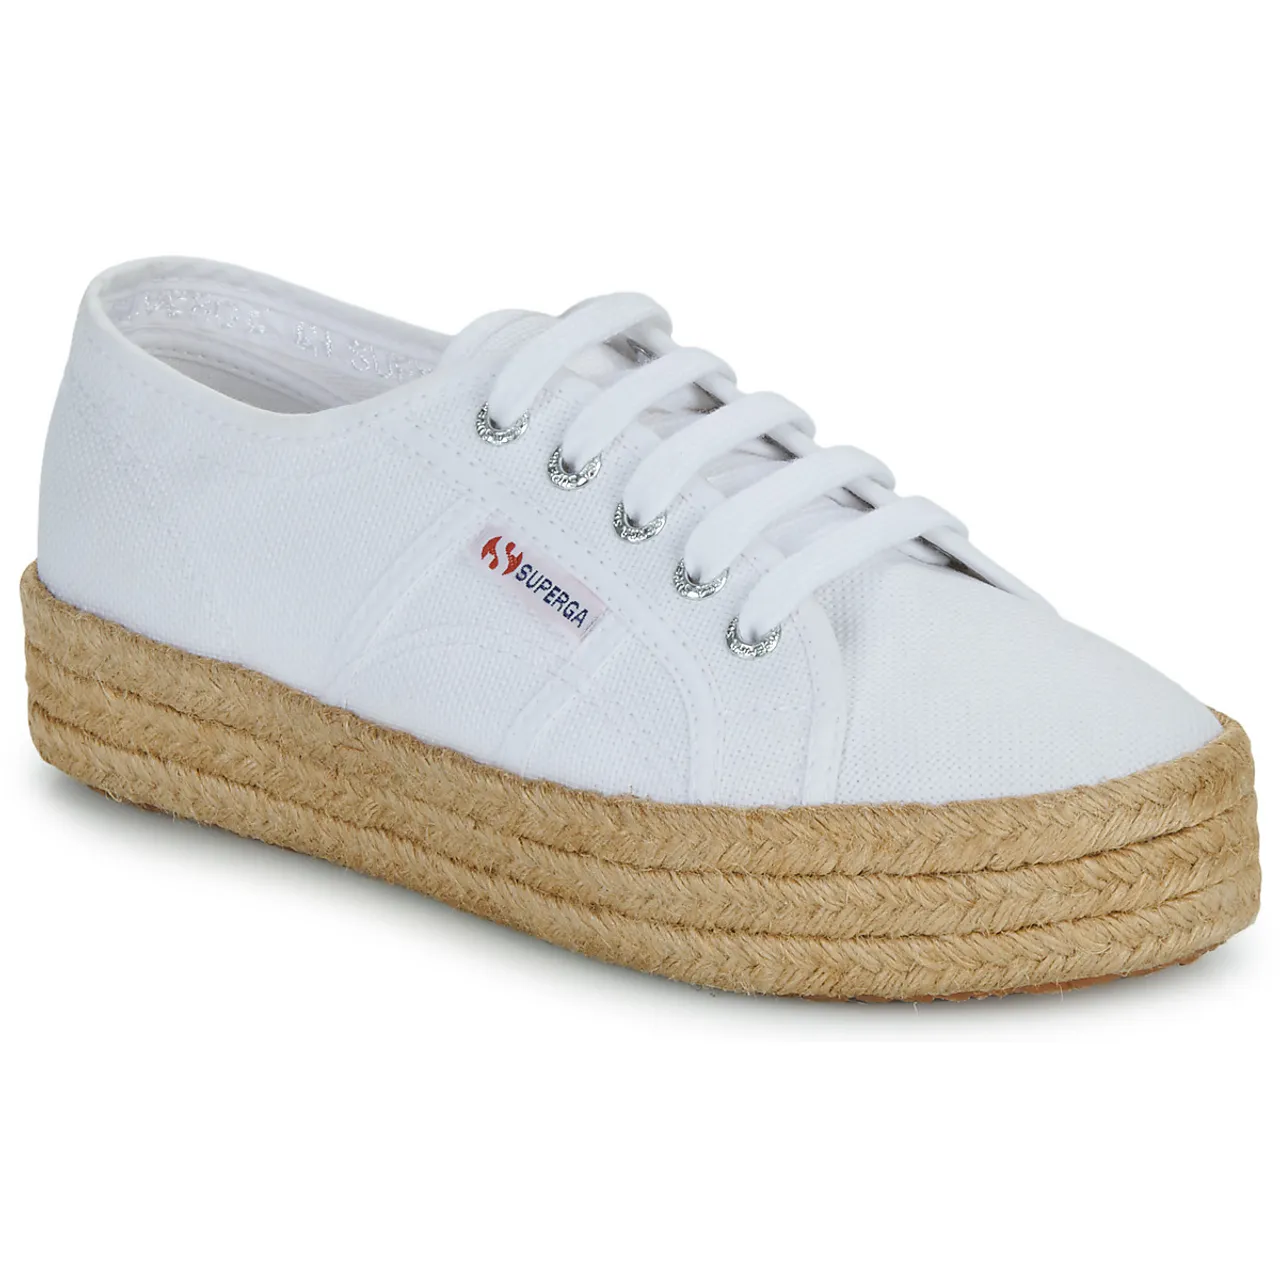 Superga  2730 COTON  women's Shoes (Trainers) in White